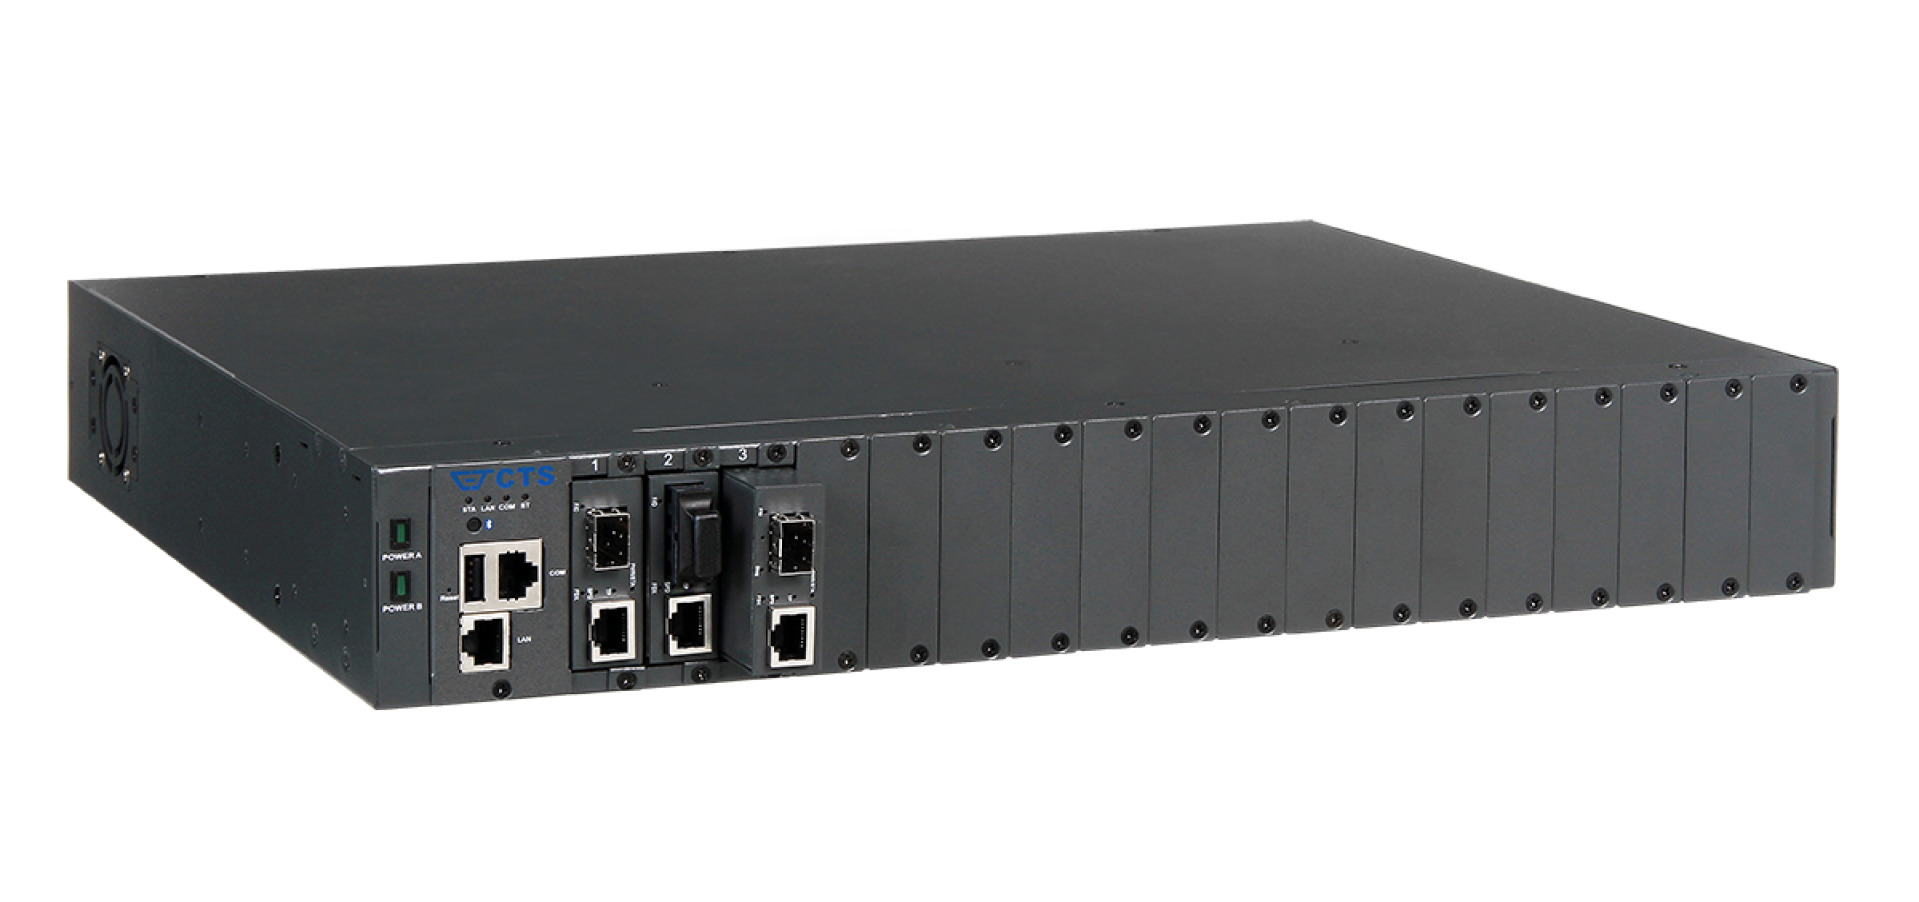 1.5U 19" Rack Chassis for MCT Converter, 18 Slots, Managed, incl. 2x power s.